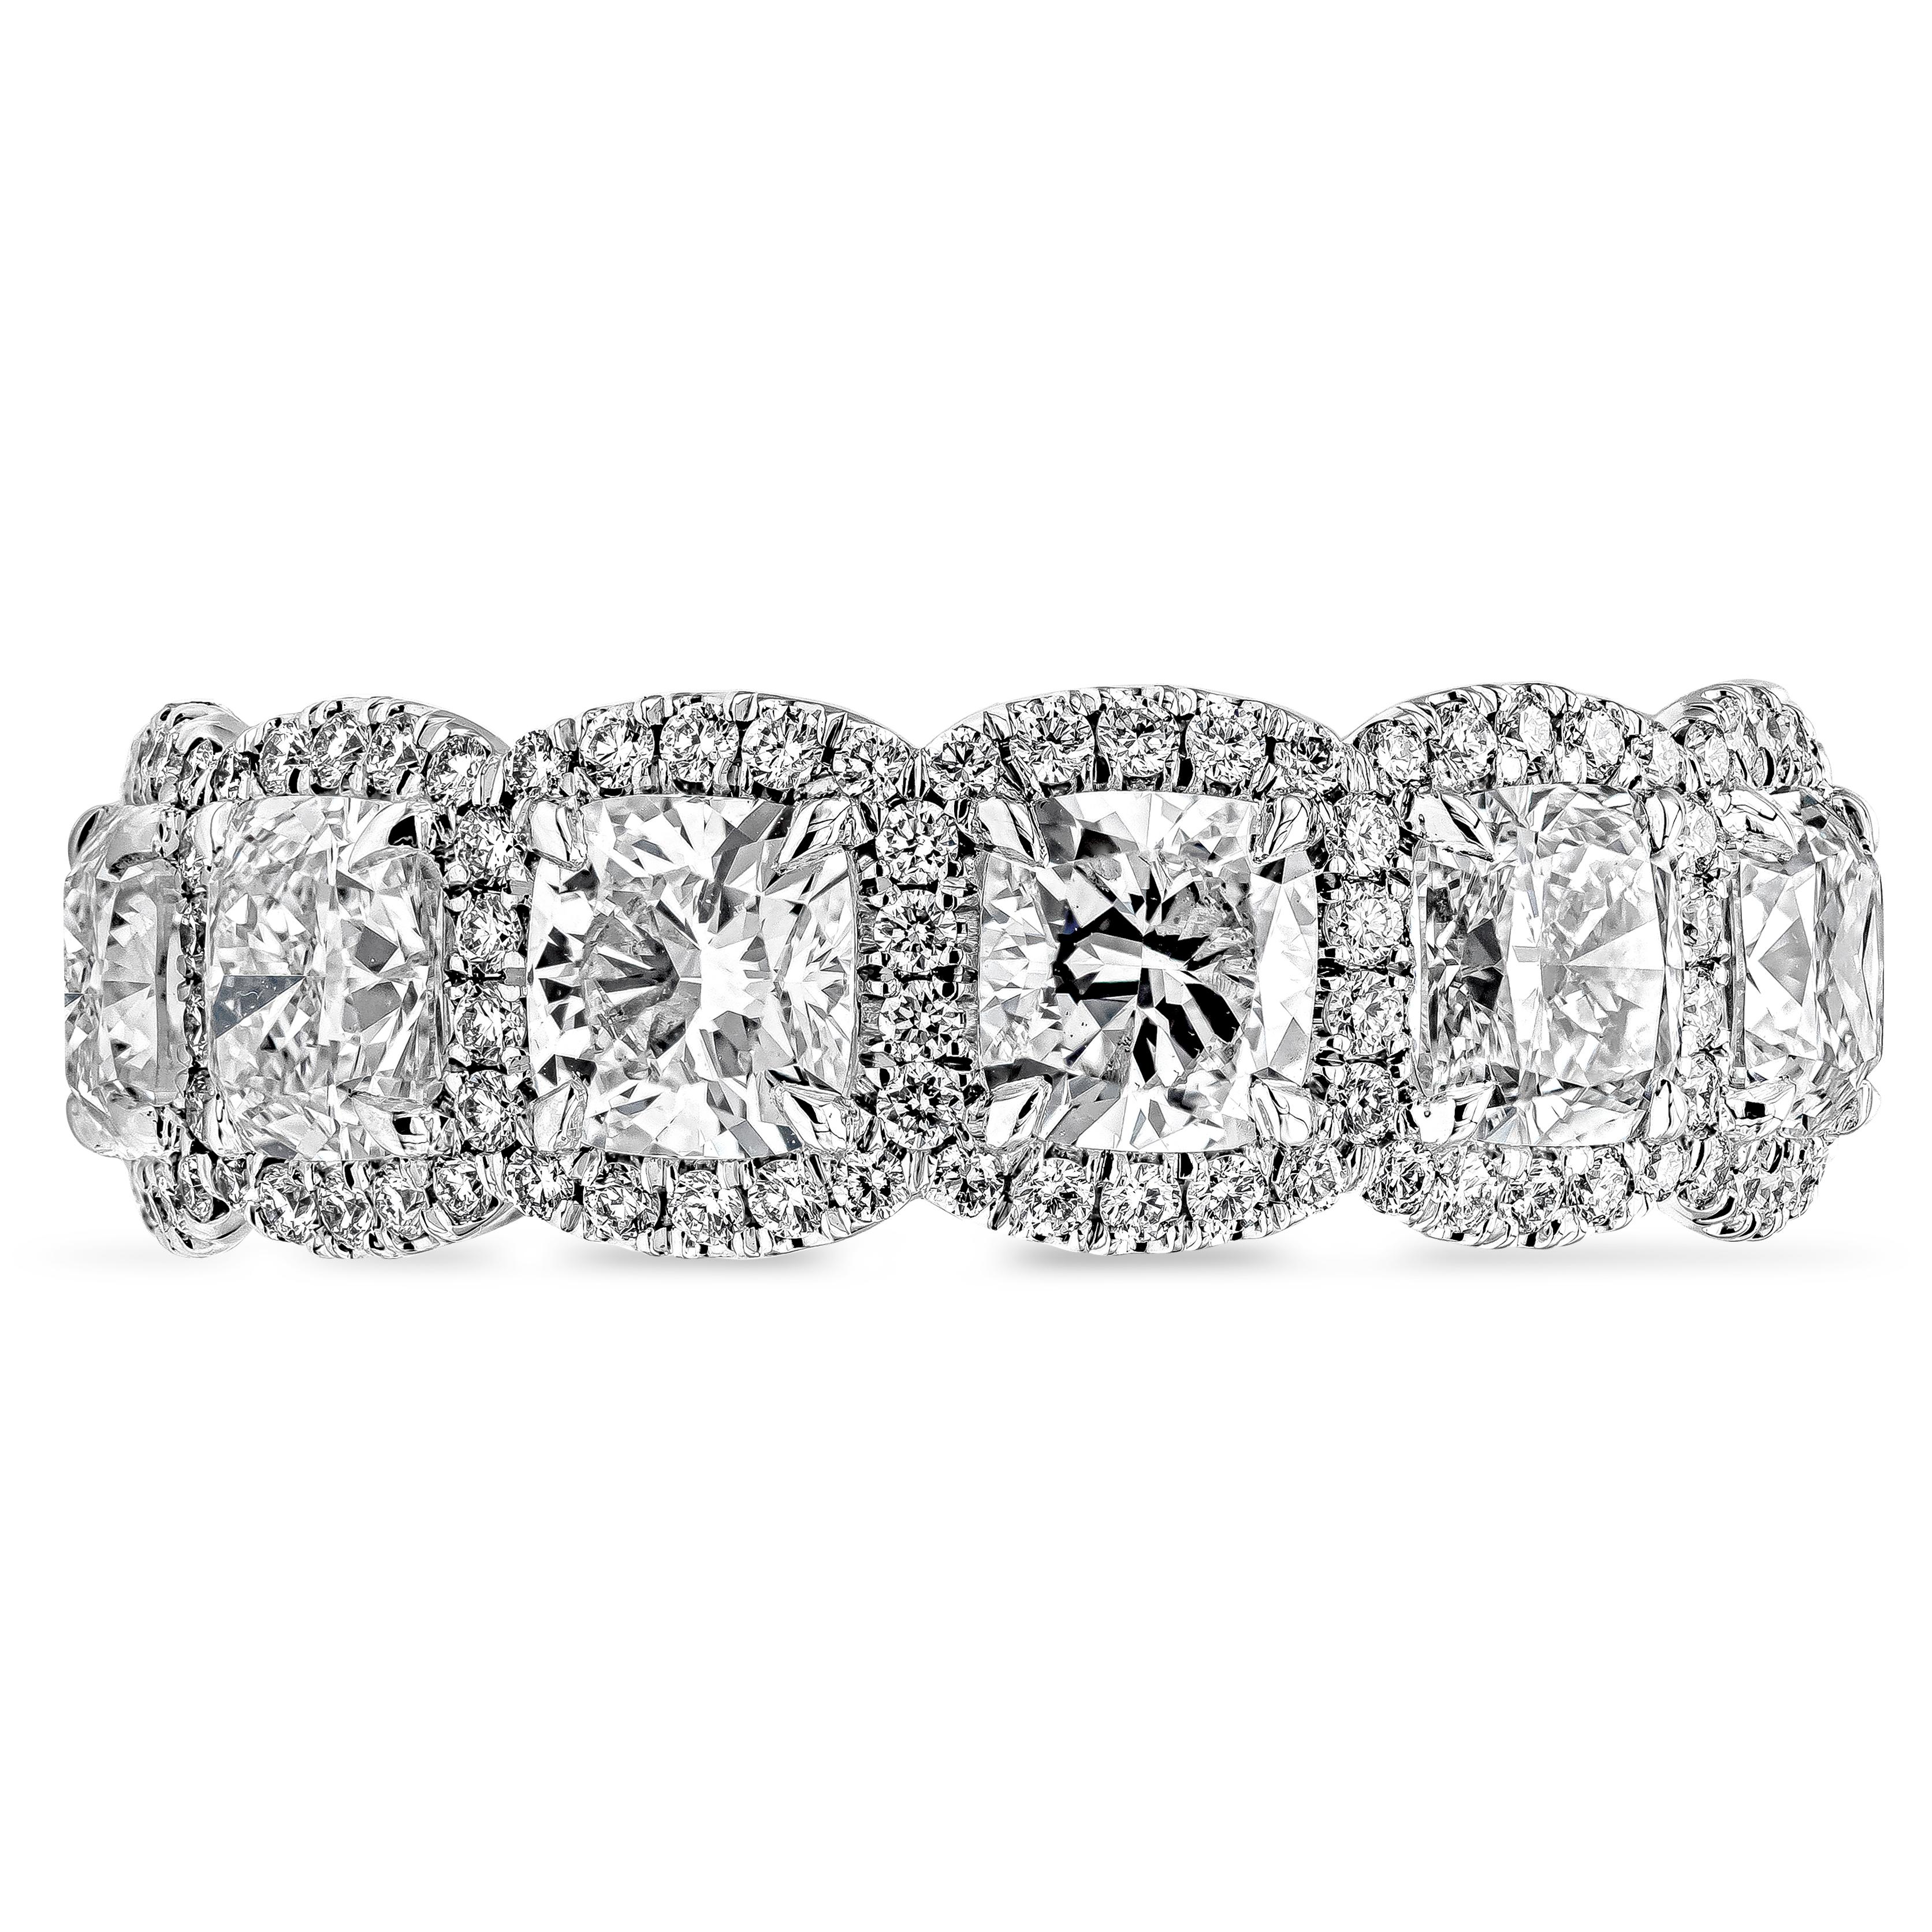 An intricately designed wedding band style showcasing a row of GIA Certified cushion cut diamonds, E-F Color, and VS-VVS in Clarity. Each cushion cut diamond is surrounded by a single row of brilliant round diamonds weighing 0.70 carats total, E-F